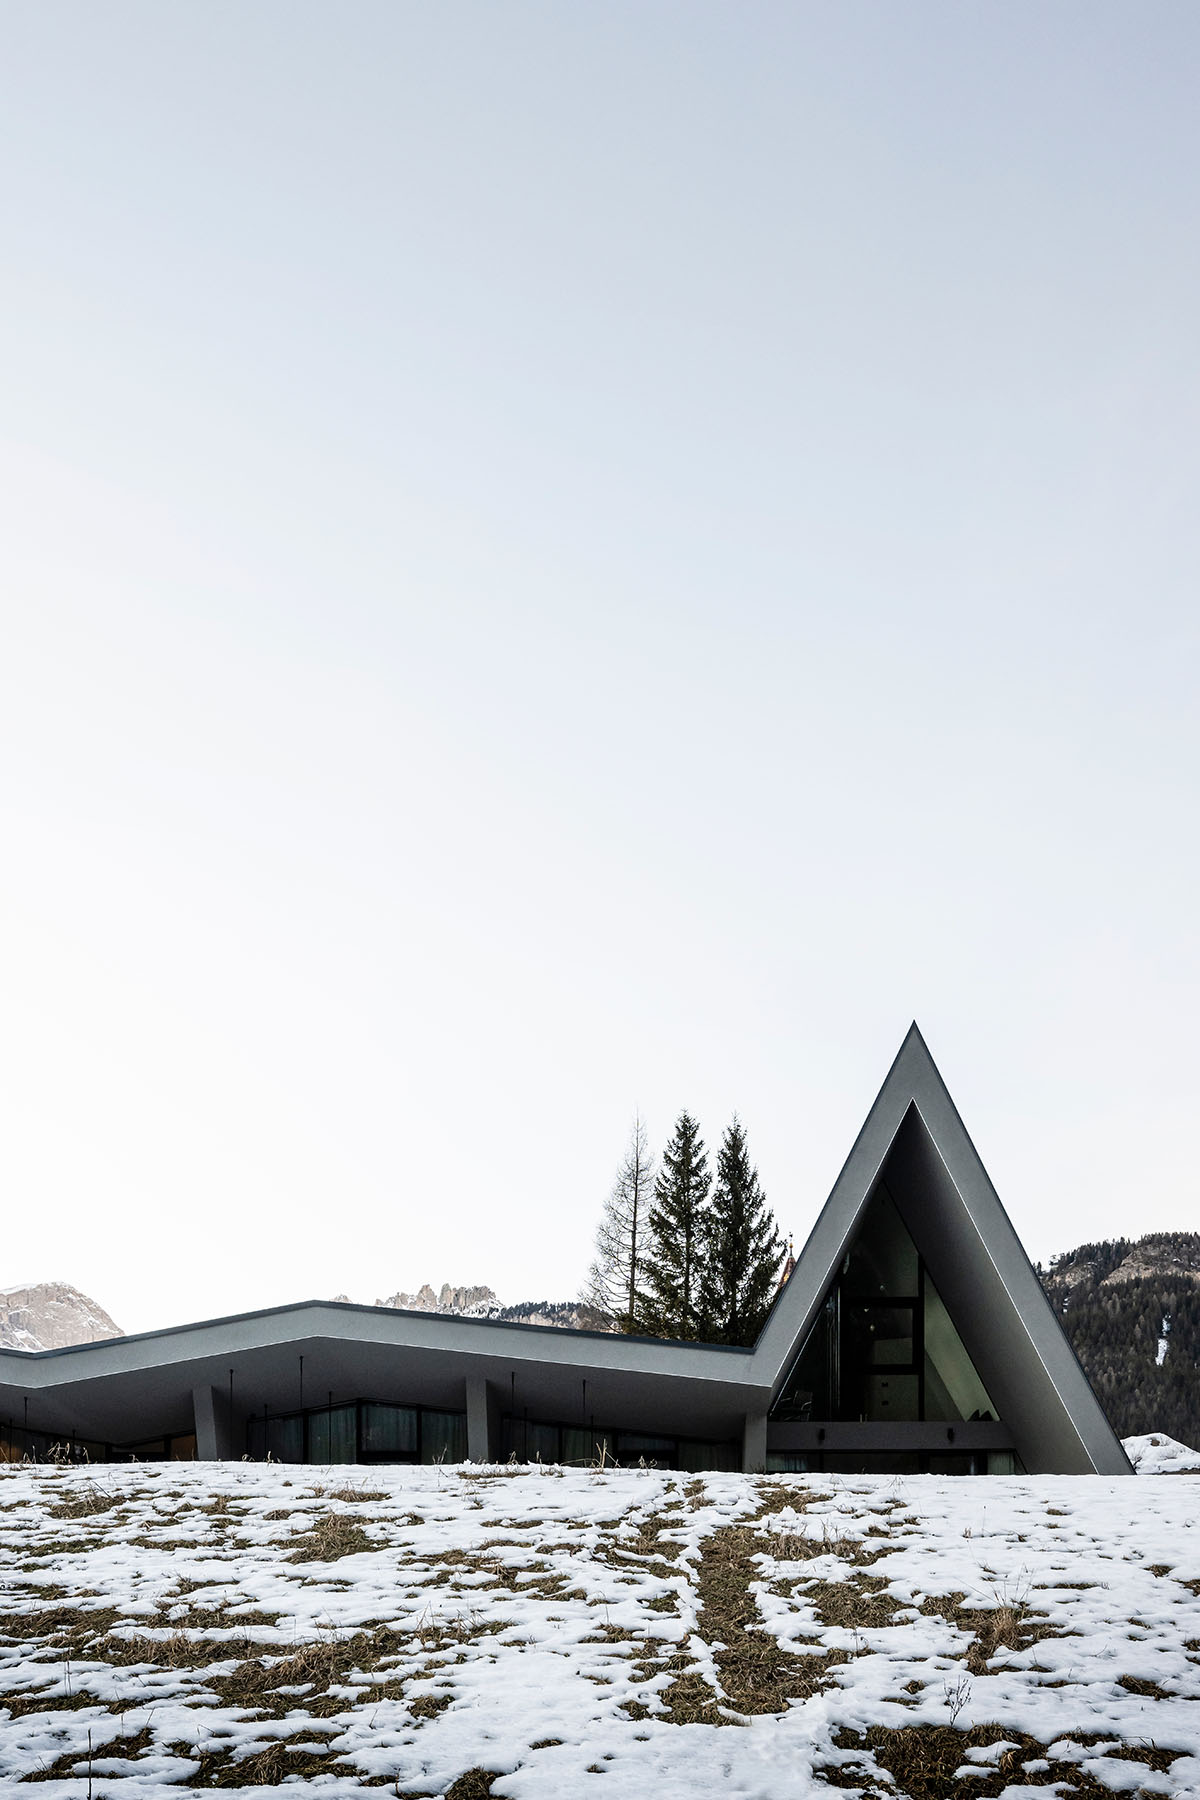 Zigzag roof defines character of Olympic Spa Hotel by NOA in the Alpine meadow